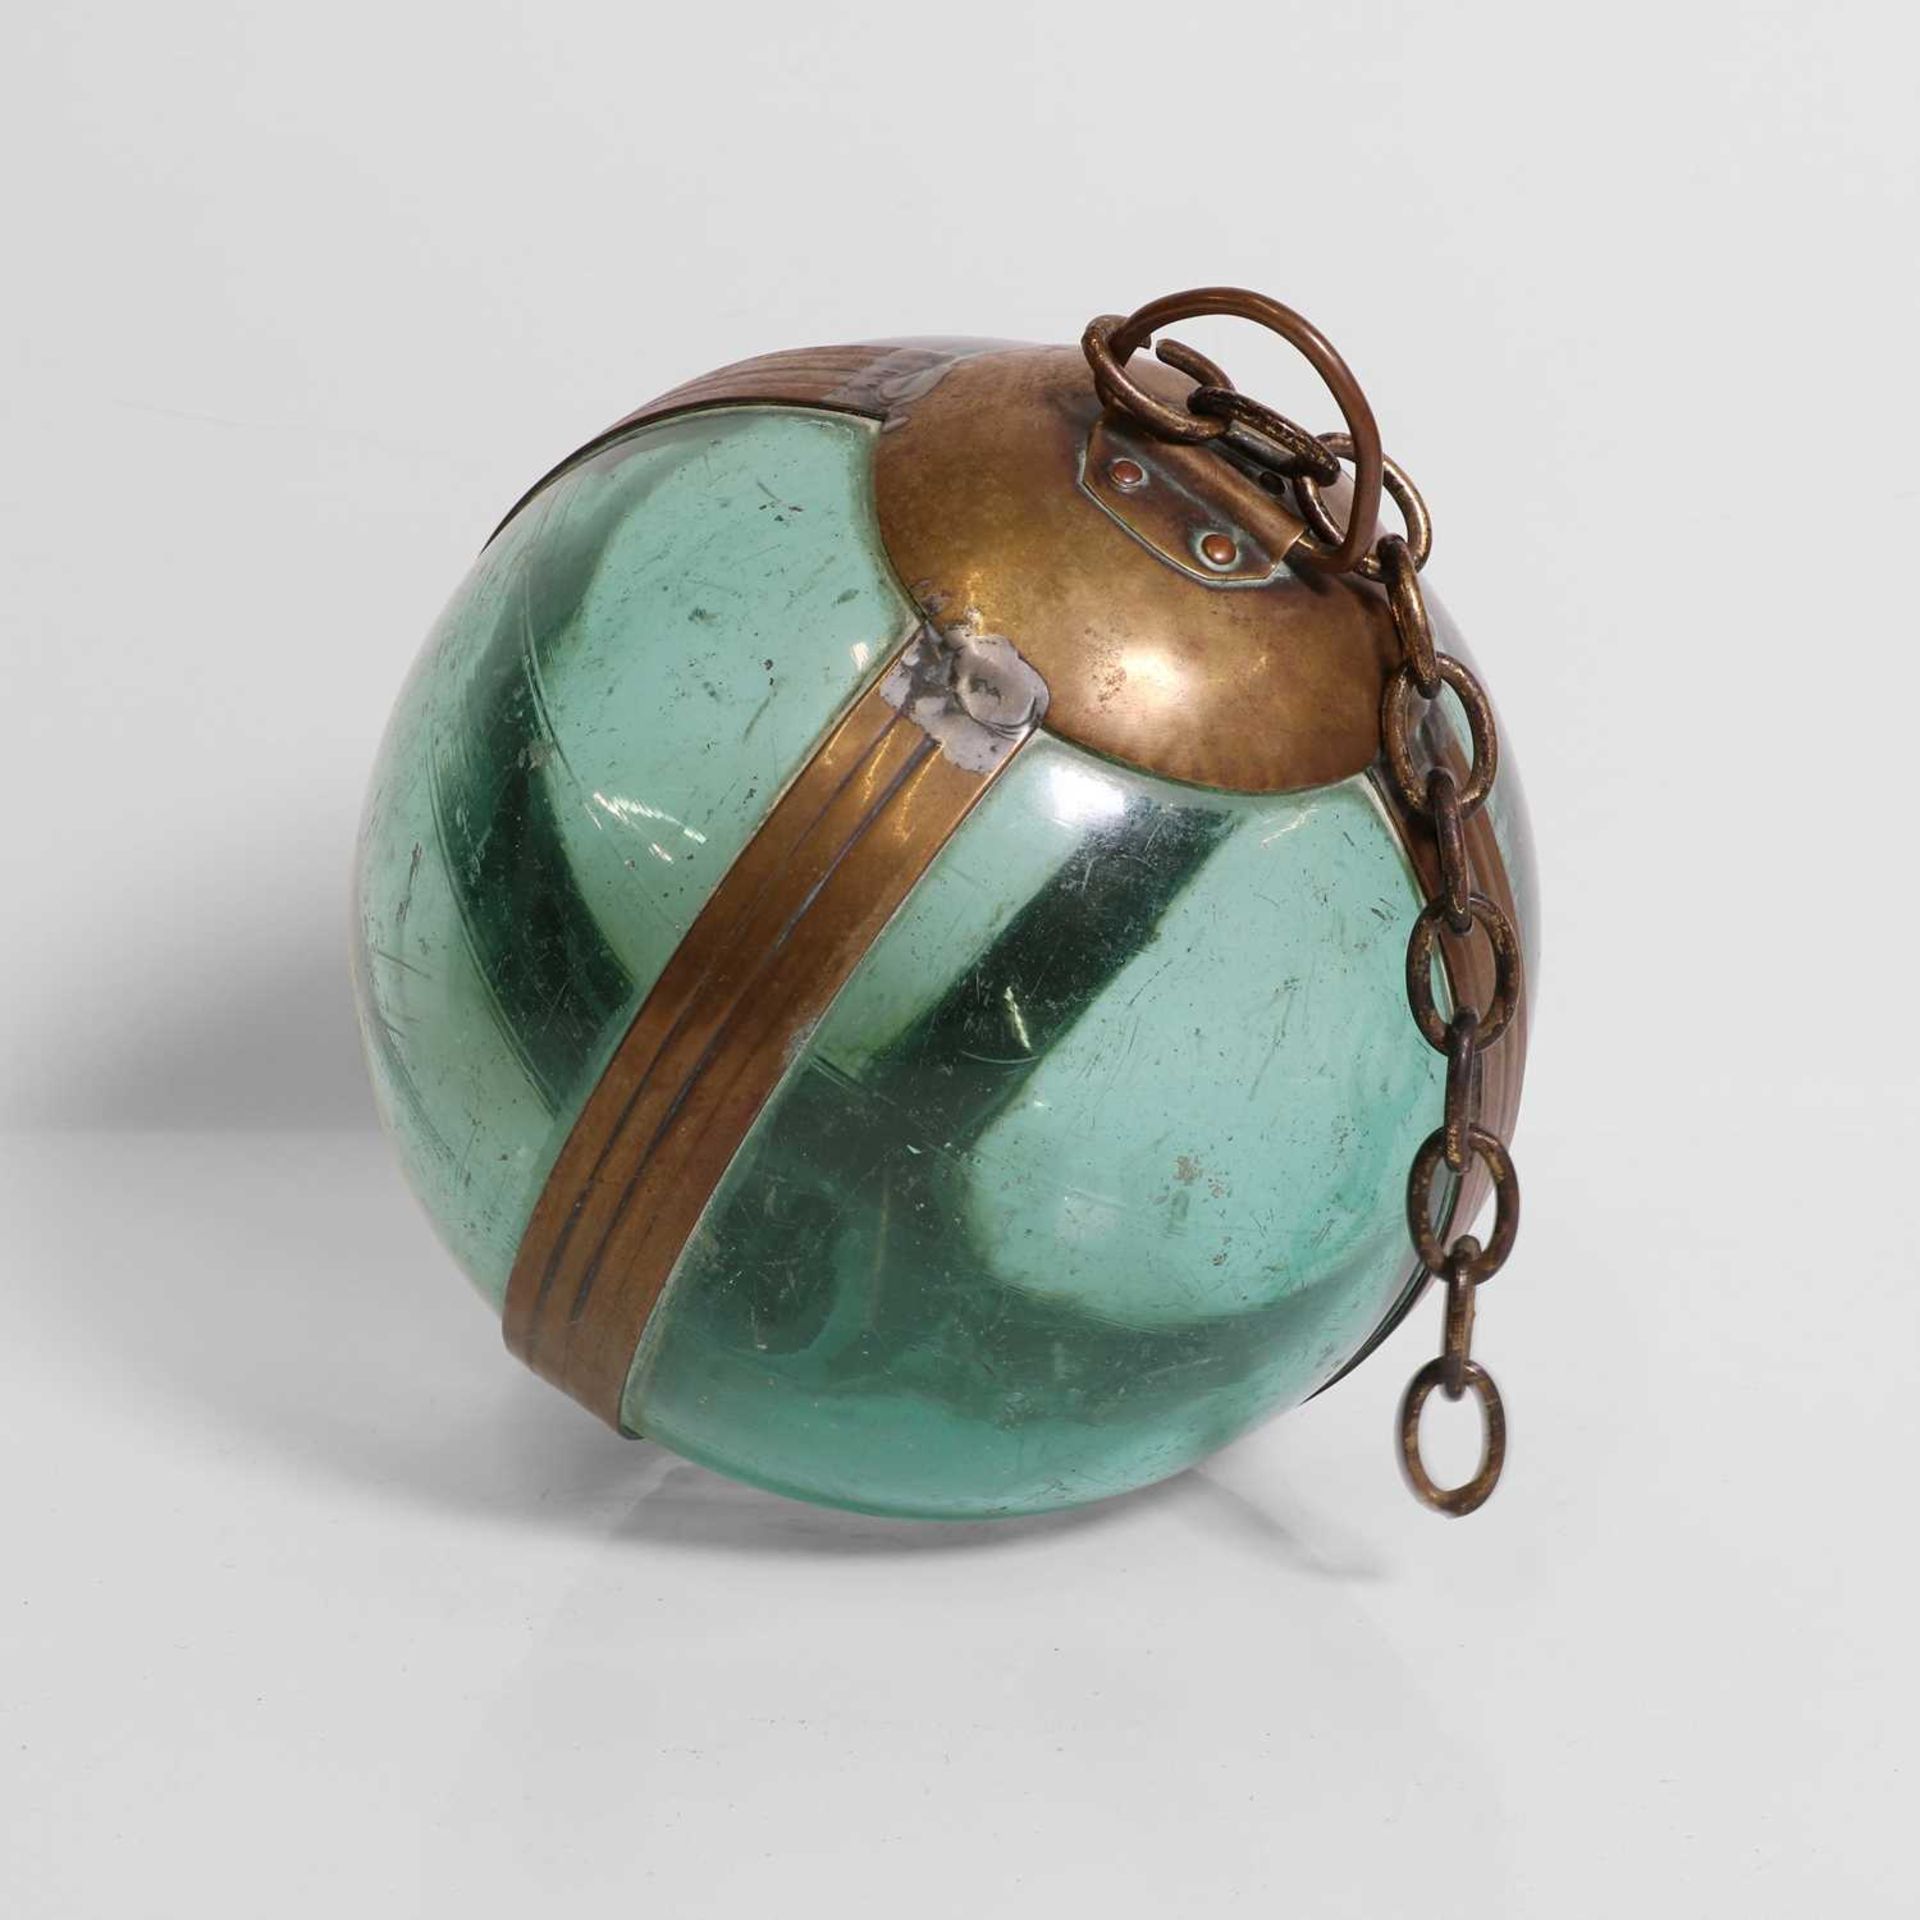 A brass-mounted pale-green glass buoy or fishing float,